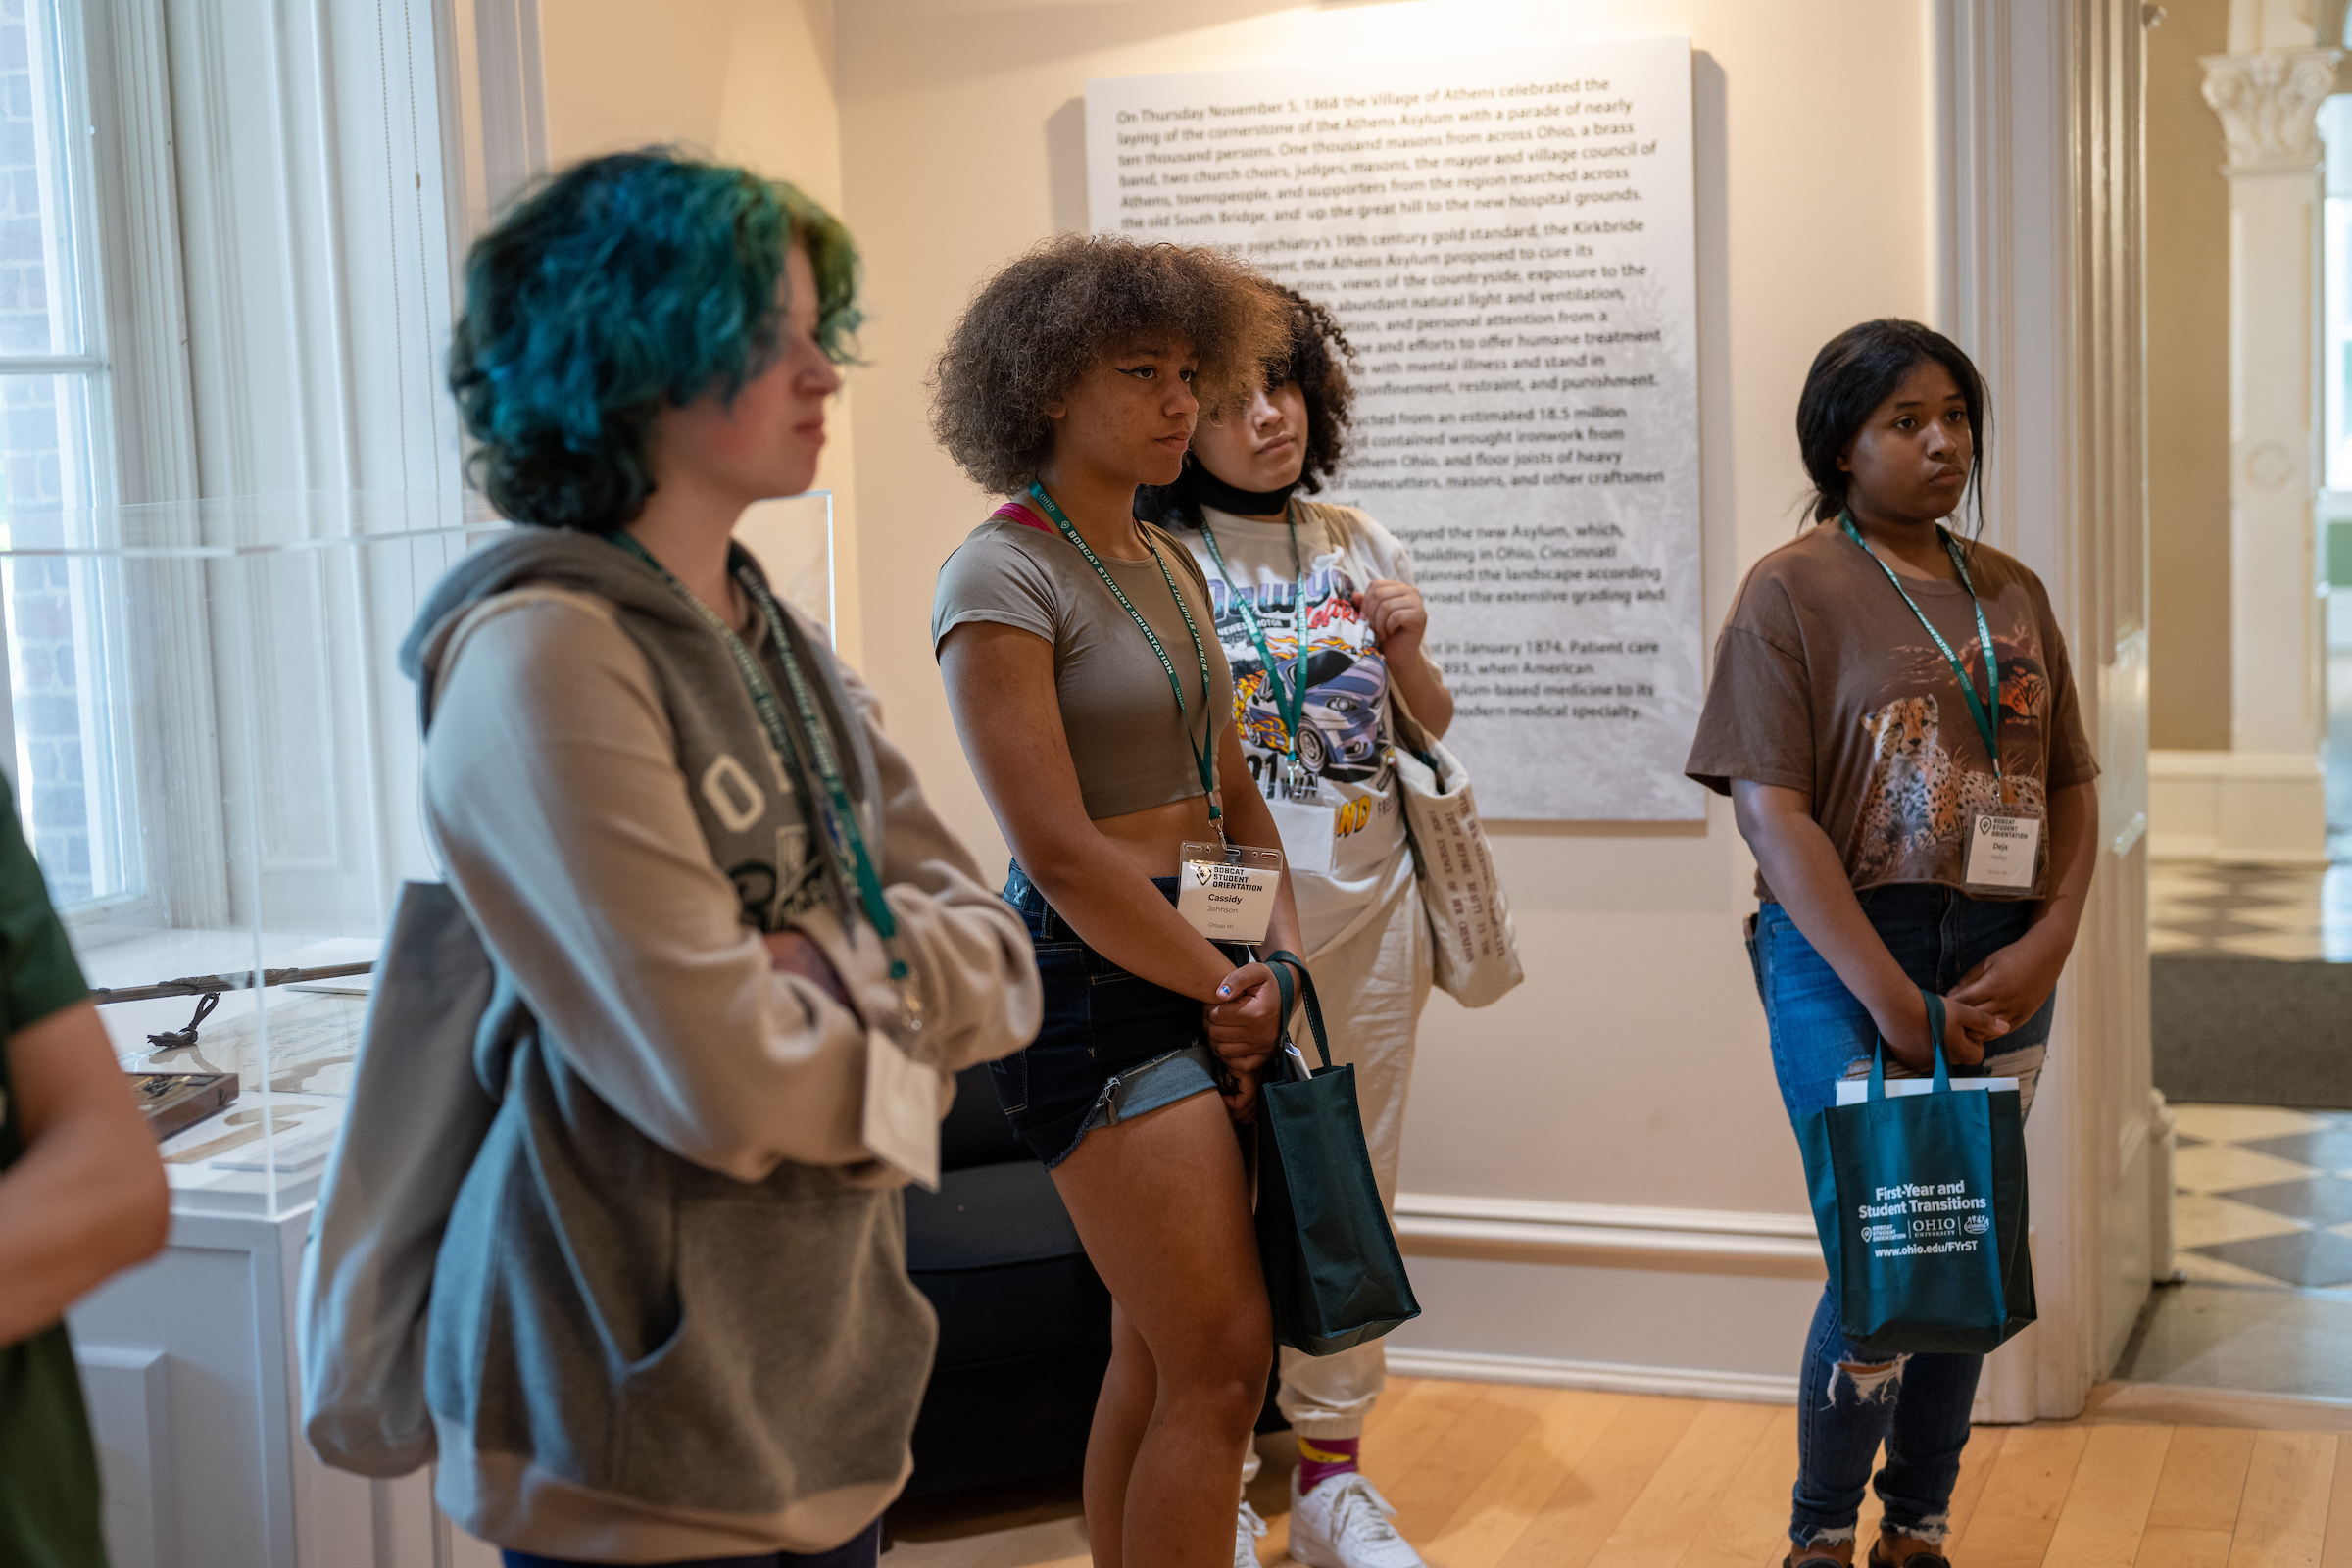 A group of Sibling Orientation students are shown at the Kennedy Musuem